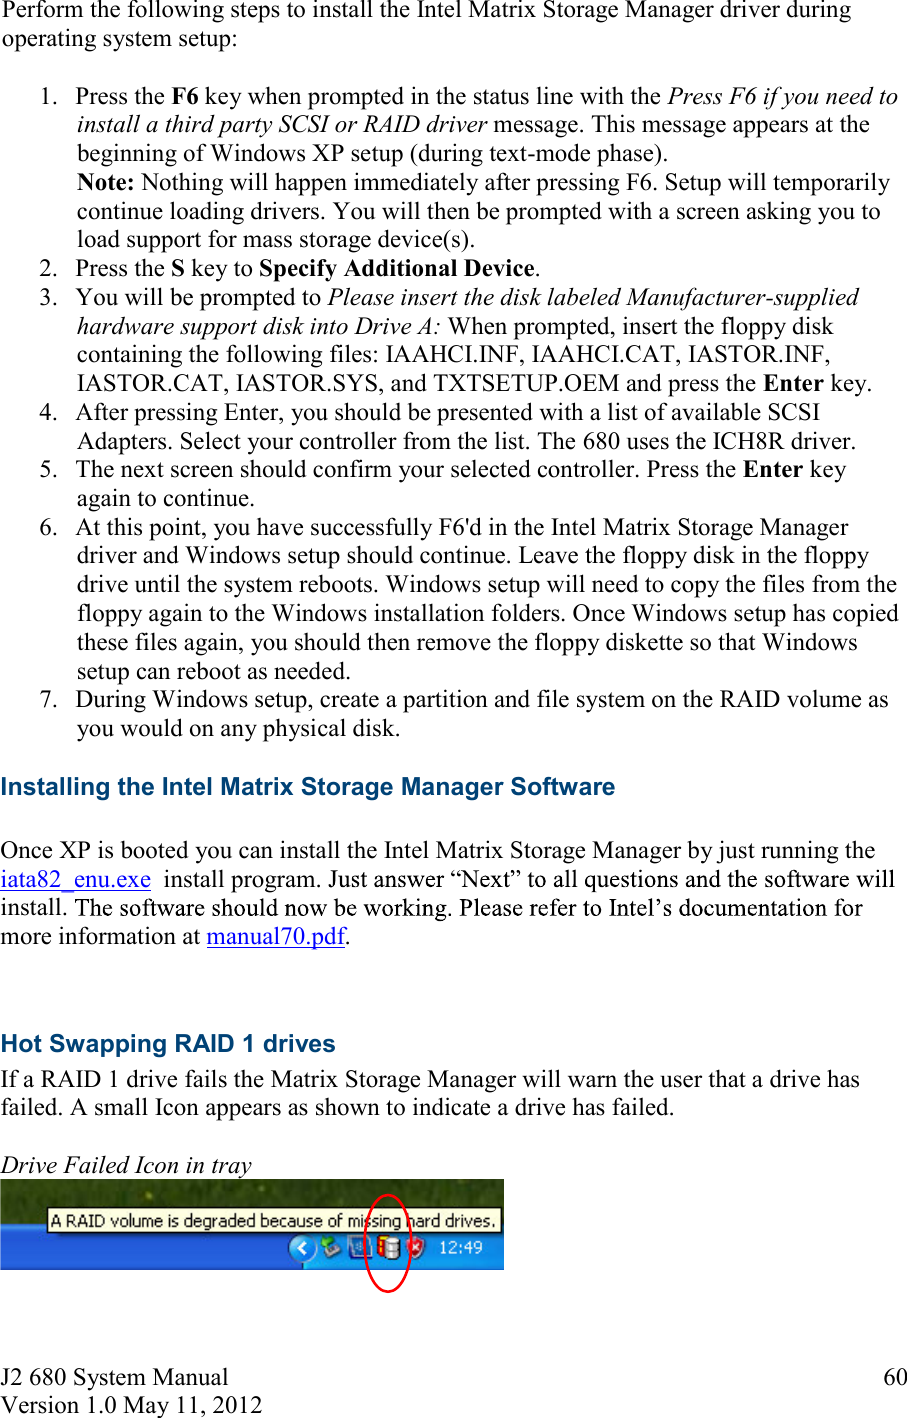 J2 680 System Manual Version 1.0 May 11, 2012     60Perform the following steps to install the Intel Matrix Storage Manager driver during operating system setup: 1. Press the F6 key when prompted in the status line with the Press F6 if you need to install a third party SCSI or RAID driver message. This message appears at the beginning of Windows XP setup (during text-mode phase). Note: Nothing will happen immediately after pressing F6. Setup will temporarily continue loading drivers. You will then be prompted with a screen asking you to load support for mass storage device(s).  2. Press the S key to Specify Additional Device.  3. You will be prompted to Please insert the disk labeled Manufacturer-supplied hardware support disk into Drive A: When prompted, insert the floppy disk containing the following files: IAAHCI.INF, IAAHCI.CAT, IASTOR.INF, IASTOR.CAT, IASTOR.SYS, and TXTSETUP.OEM and press the Enter key.  4. After pressing Enter, you should be presented with a list of available SCSI Adapters. Select your controller from the list. The 680 uses the ICH8R driver. 5. The next screen should confirm your selected controller. Press the Enter key again to continue.  6. At this point, you have successfully F6&apos;d in the Intel Matrix Storage Manager driver and Windows setup should continue. Leave the floppy disk in the floppy drive until the system reboots. Windows setup will need to copy the files from the floppy again to the Windows installation folders. Once Windows setup has copied these files again, you should then remove the floppy diskette so that Windows setup can reboot as needed.  7. During Windows setup, create a partition and file system on the RAID volume as you would on any physical disk. Installing the Intel Matrix Storage Manager Software  Once XP is booted you can install the Intel Matrix Storage Manager by just running the iata82_enu.exe  install program. install. more information at manual70.pdf.  Hot Swapping RAID 1 drives If a RAID 1 drive fails the Matrix Storage Manager will warn the user that a drive has failed. A small Icon appears as shown to indicate a drive has failed.   Drive Failed Icon in tray    